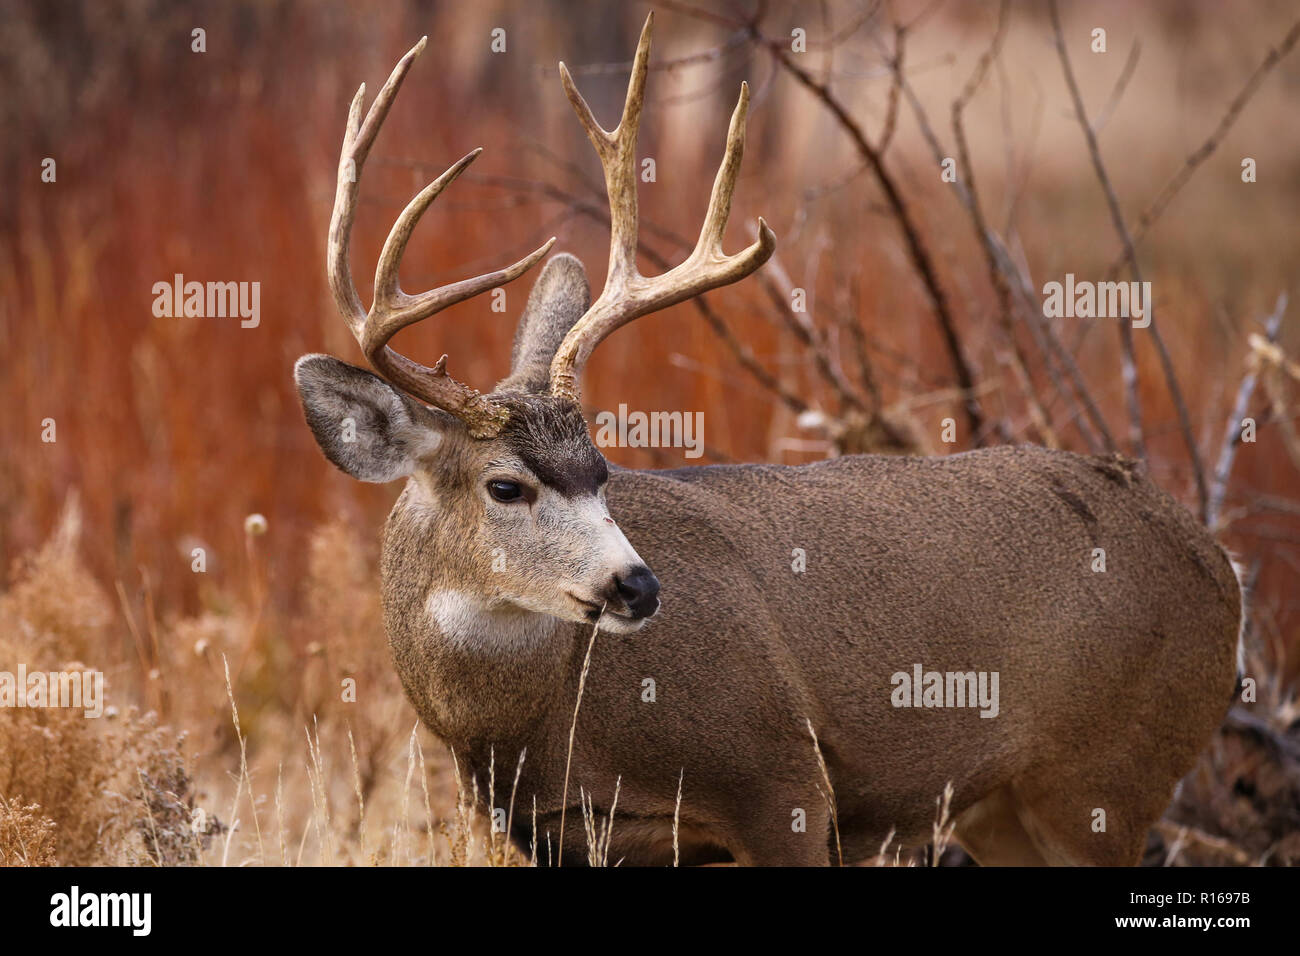 Mule deer buck in autumn foliage with large antlers Stock Photo